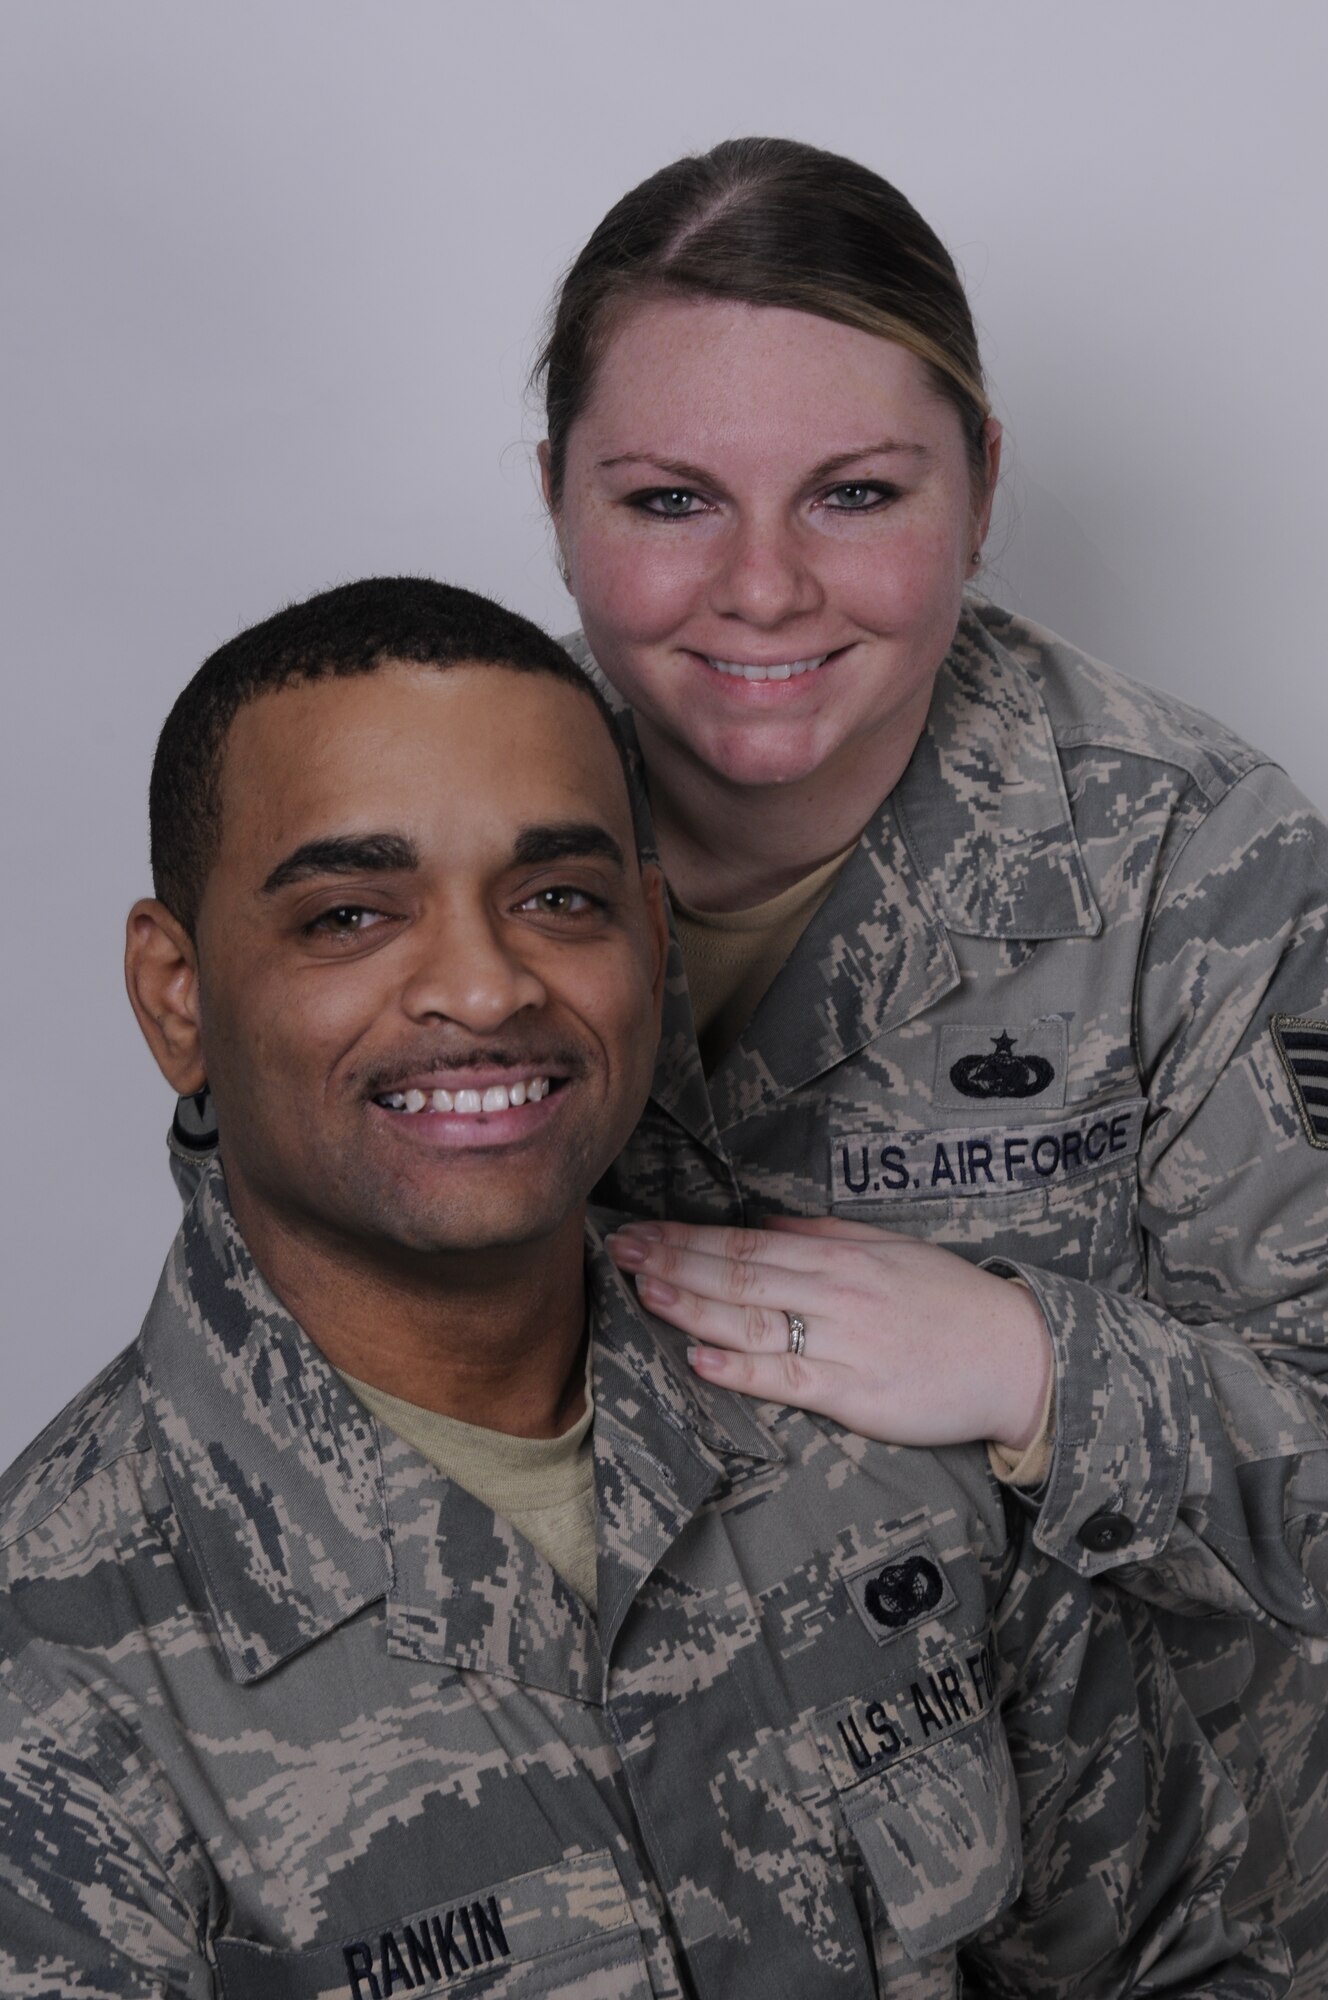 Staff Sgt. Christopher L. Rankin, a security forces specialist with the 130th Security Forces Squadron, 130th Airlift Wing, West Virginia Air National Guard, Charleston, W.Va. and his wife, Staff Sgt. Pauline Rankin, a supply technician with the 130th Logistics Squadron pose for a portrait in the 130th AW Public Affairs photography studio, Jan. 9. The staff sergeants joined the unit, Jan. 8, 2011. 

Staff Sgt. Christopher L. Rankin, a native of Huntington, W.Va., who separated from the 130th SFS in November 2007, to be with his wife, a native of Greenoch, Scotland, who was on active duty at RAF Mildenhall in Suffolk, England at the time, said he’s happy to be back in uniform. 

The staff sgts. come to the unit from Fort Riley, Kansas, where Staff Sgt. Pauline Rankin was stationed as a supply liaison for a Tactical Air Control Party unit assigned to the 10th Air Support Operations Squadron. 

Staff Sgt. Christopher L. Rankin will complete security forces refresher training and weapons requalification at the unit. The staff sergeants have been married for four years. 

